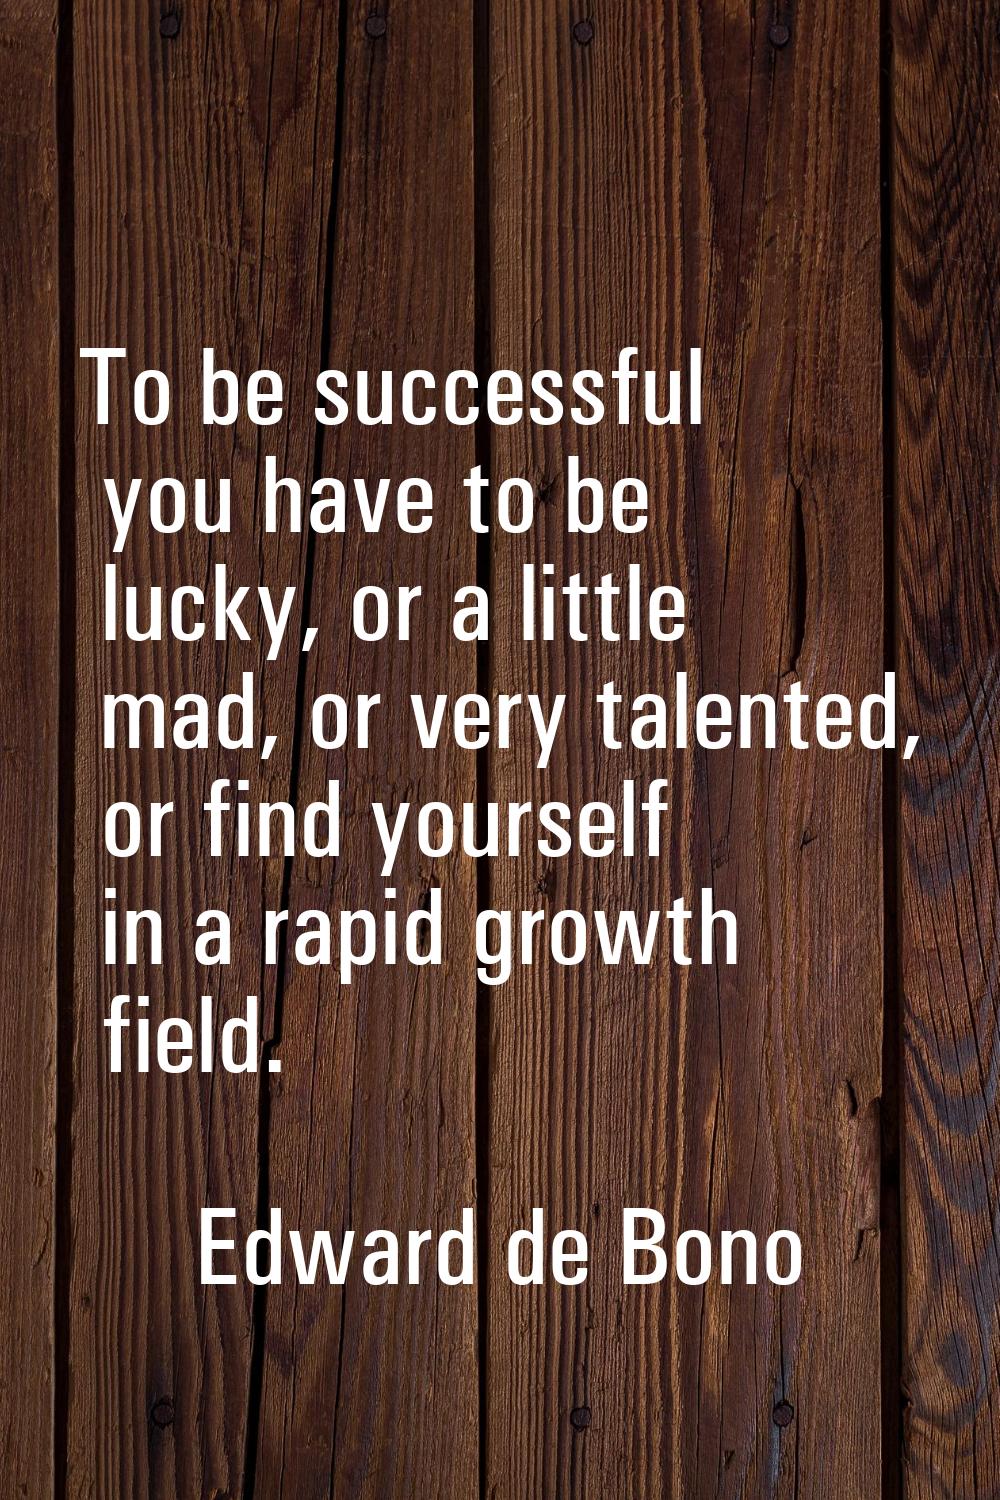 To be successful you have to be lucky, or a little mad, or very talented, or find yourself in a rap